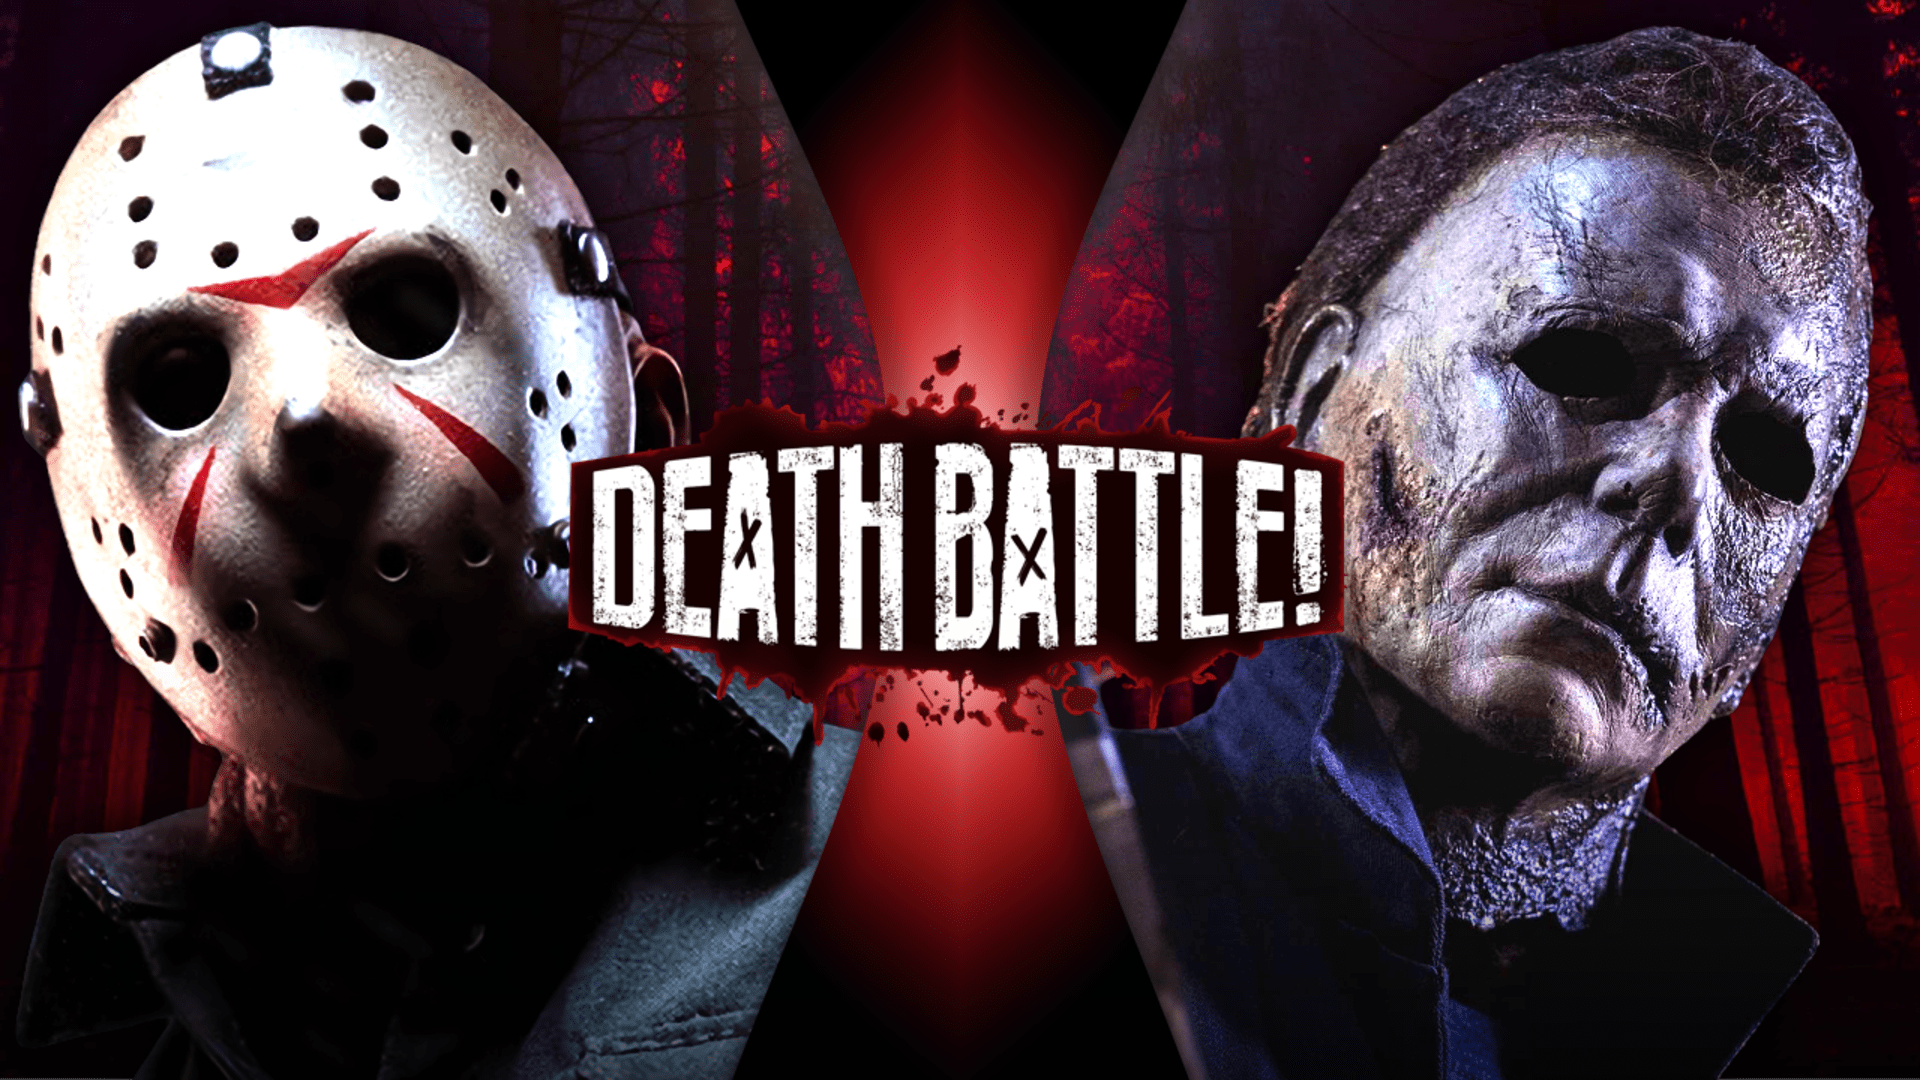 Jason Voorhees Vs Michael Myers Friday The 13th Vs Halloween Death